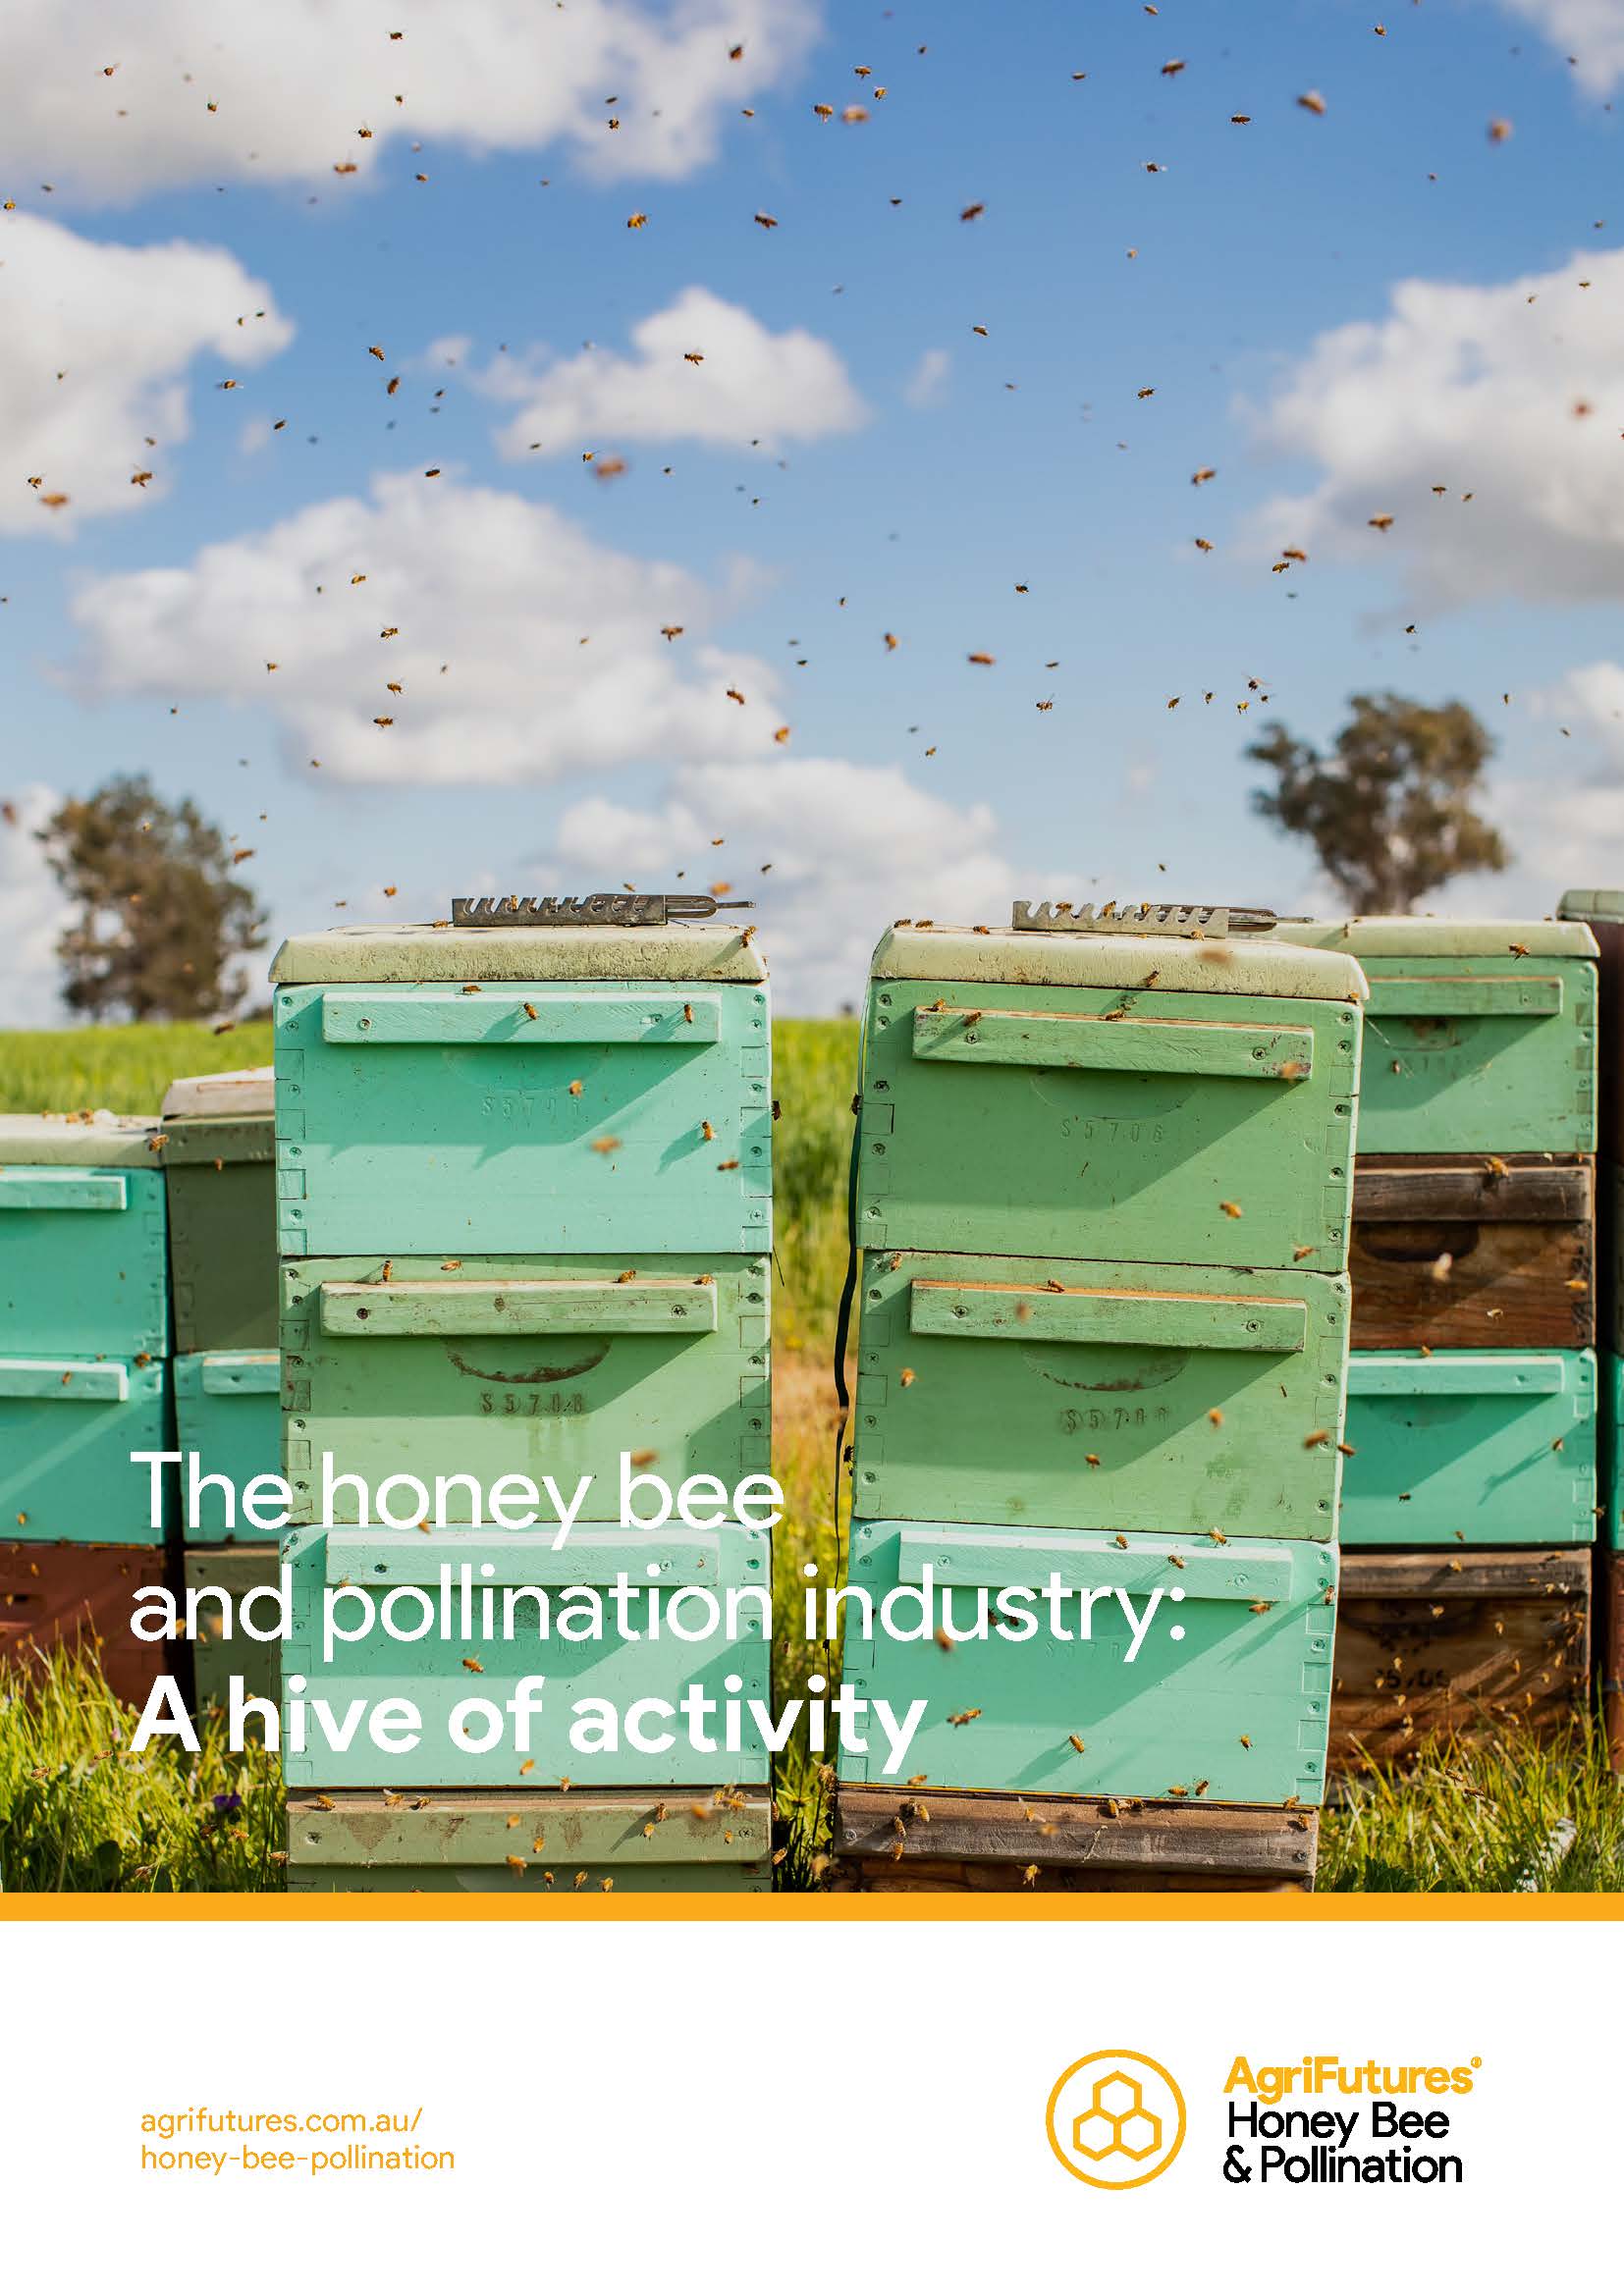 The honey bee and pollination industry: A hive of activity - image